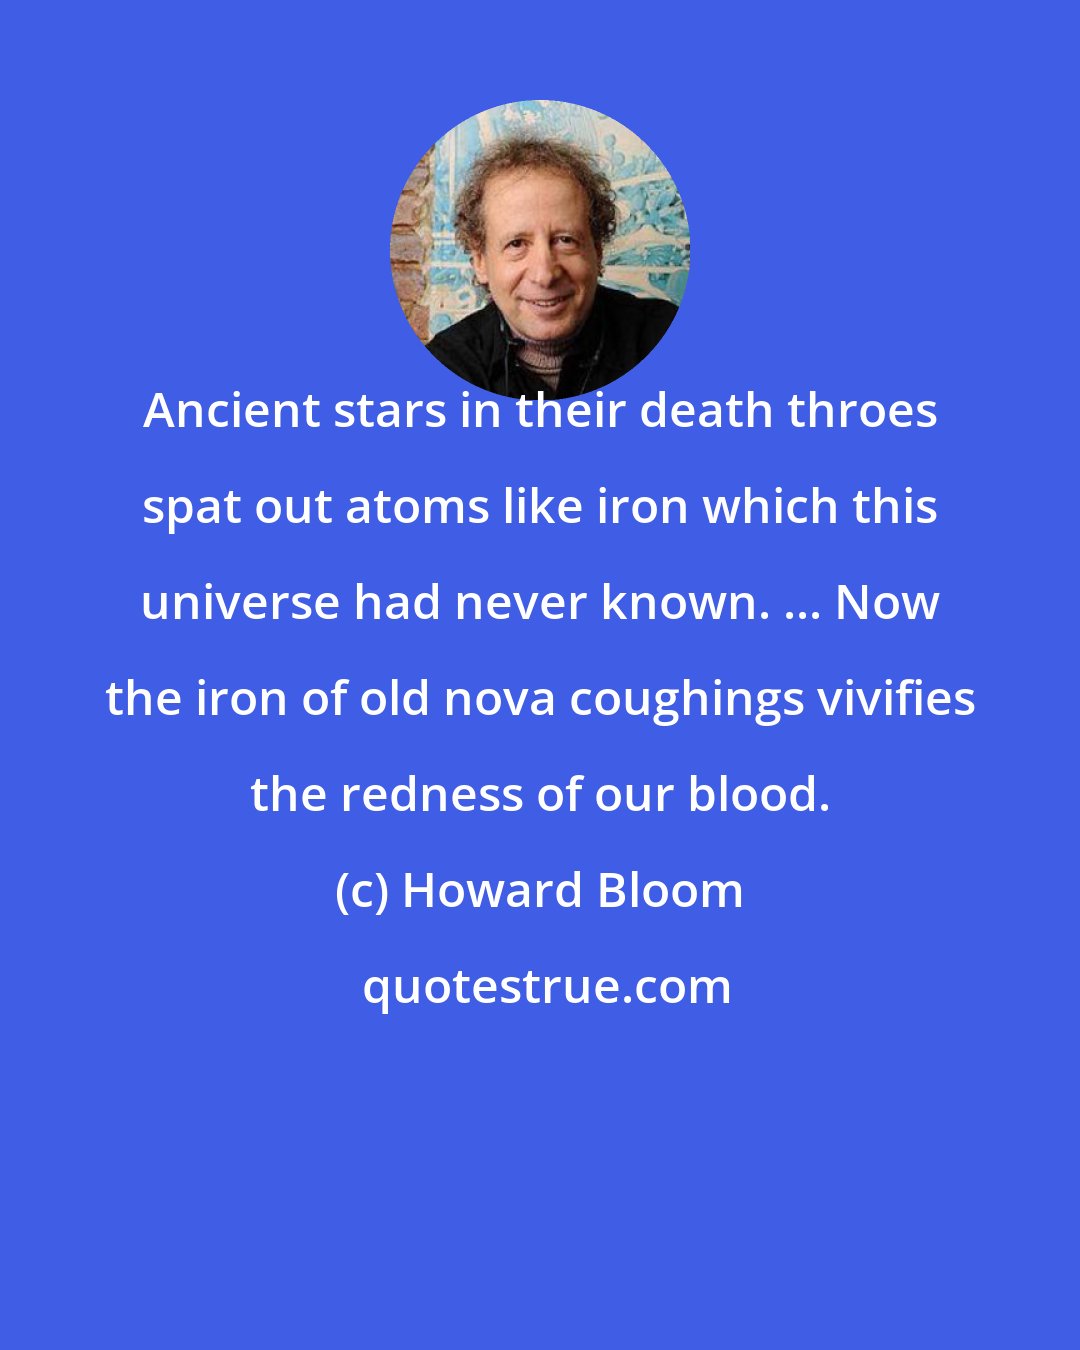 Howard Bloom: Ancient stars in their death throes spat out atoms like iron which this universe had never known. ... Now the iron of old nova coughings vivifies the redness of our blood.